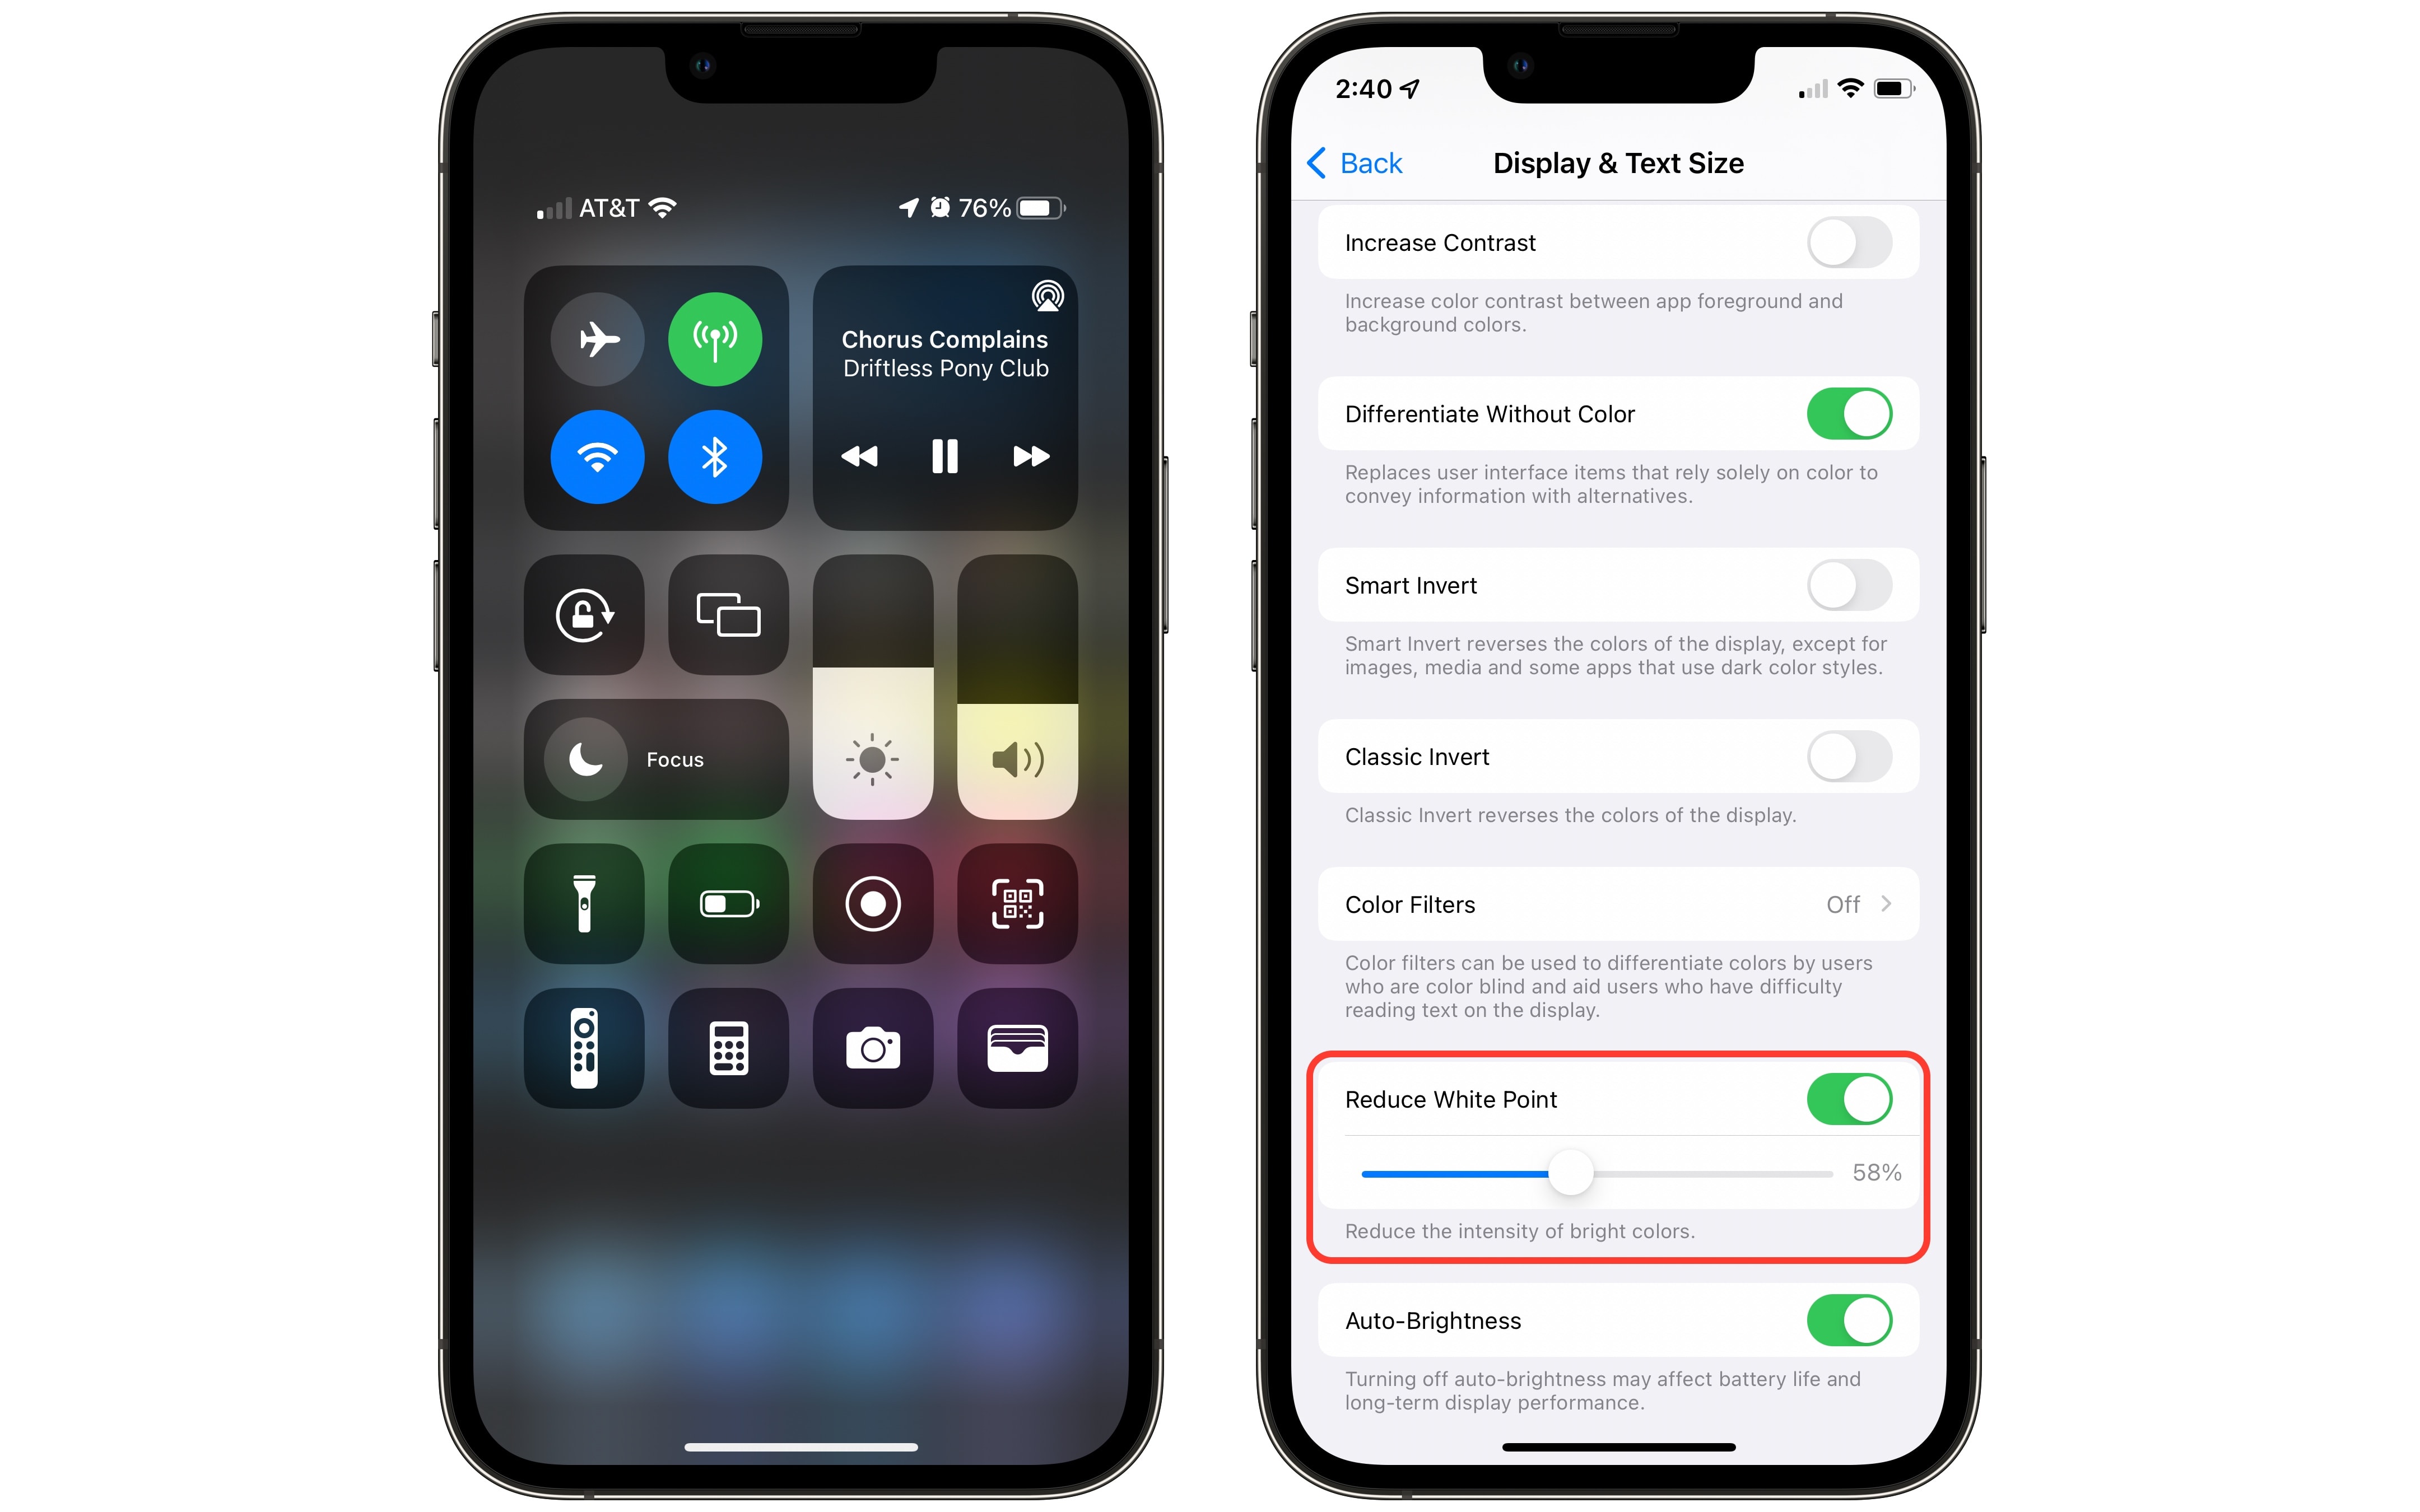 Turn down brightness in Control Center and enable Reduce White Point.